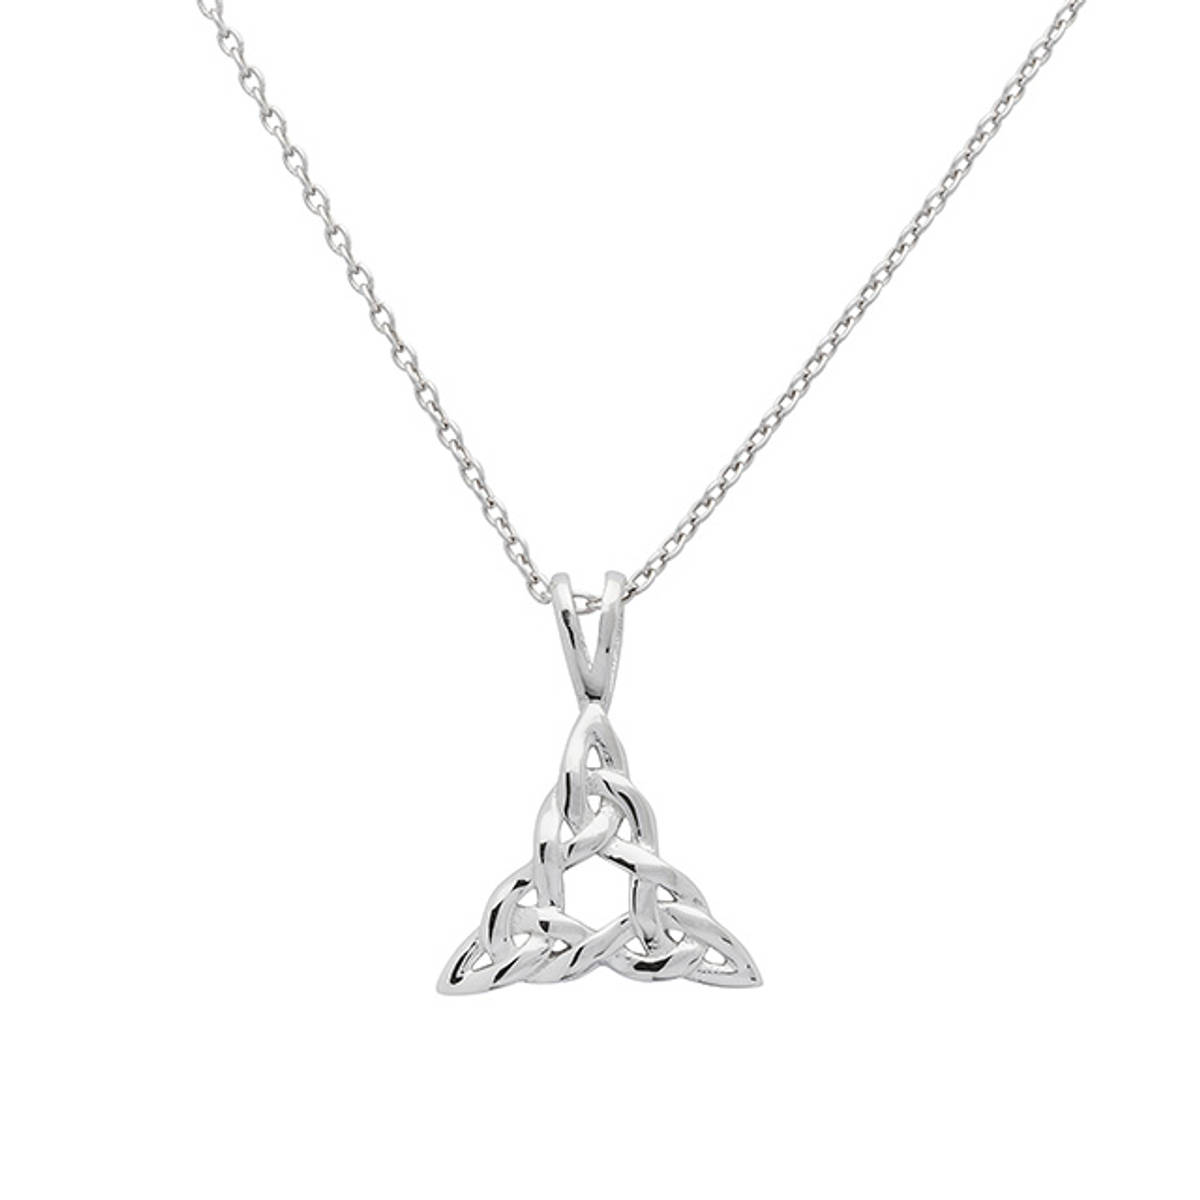 Sterling Silver Celtic Trinity Knot Pendant.

Size: 15mm
Chain Length: 18 inches
